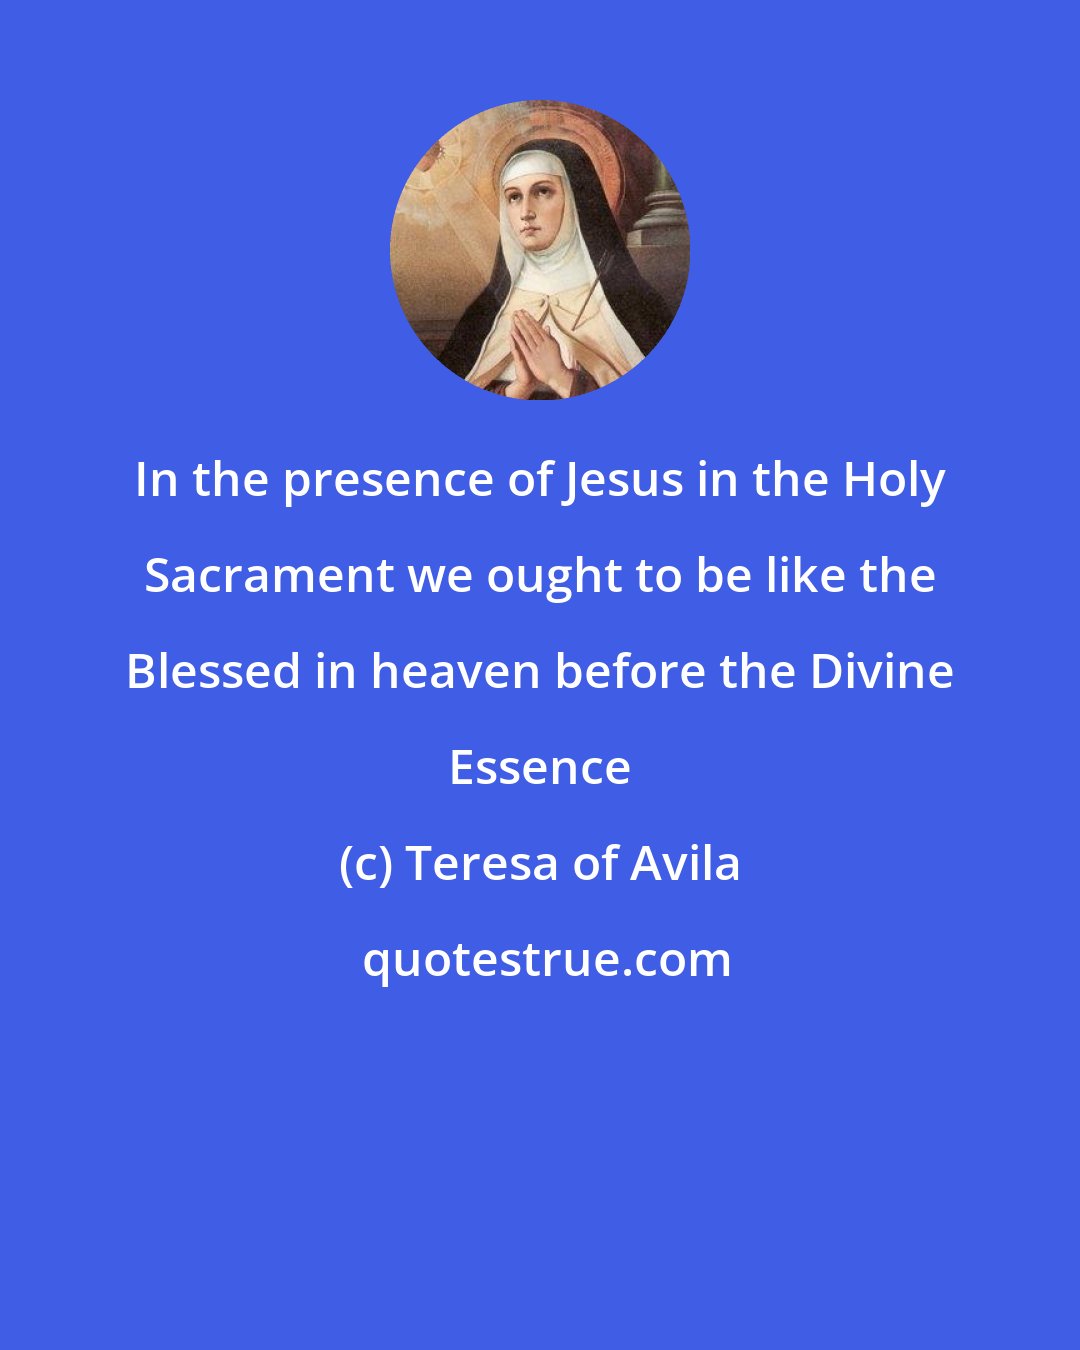 Teresa of Avila: In the presence of Jesus in the Holy Sacrament we ought to be like the Blessed in heaven before the Divine Essence